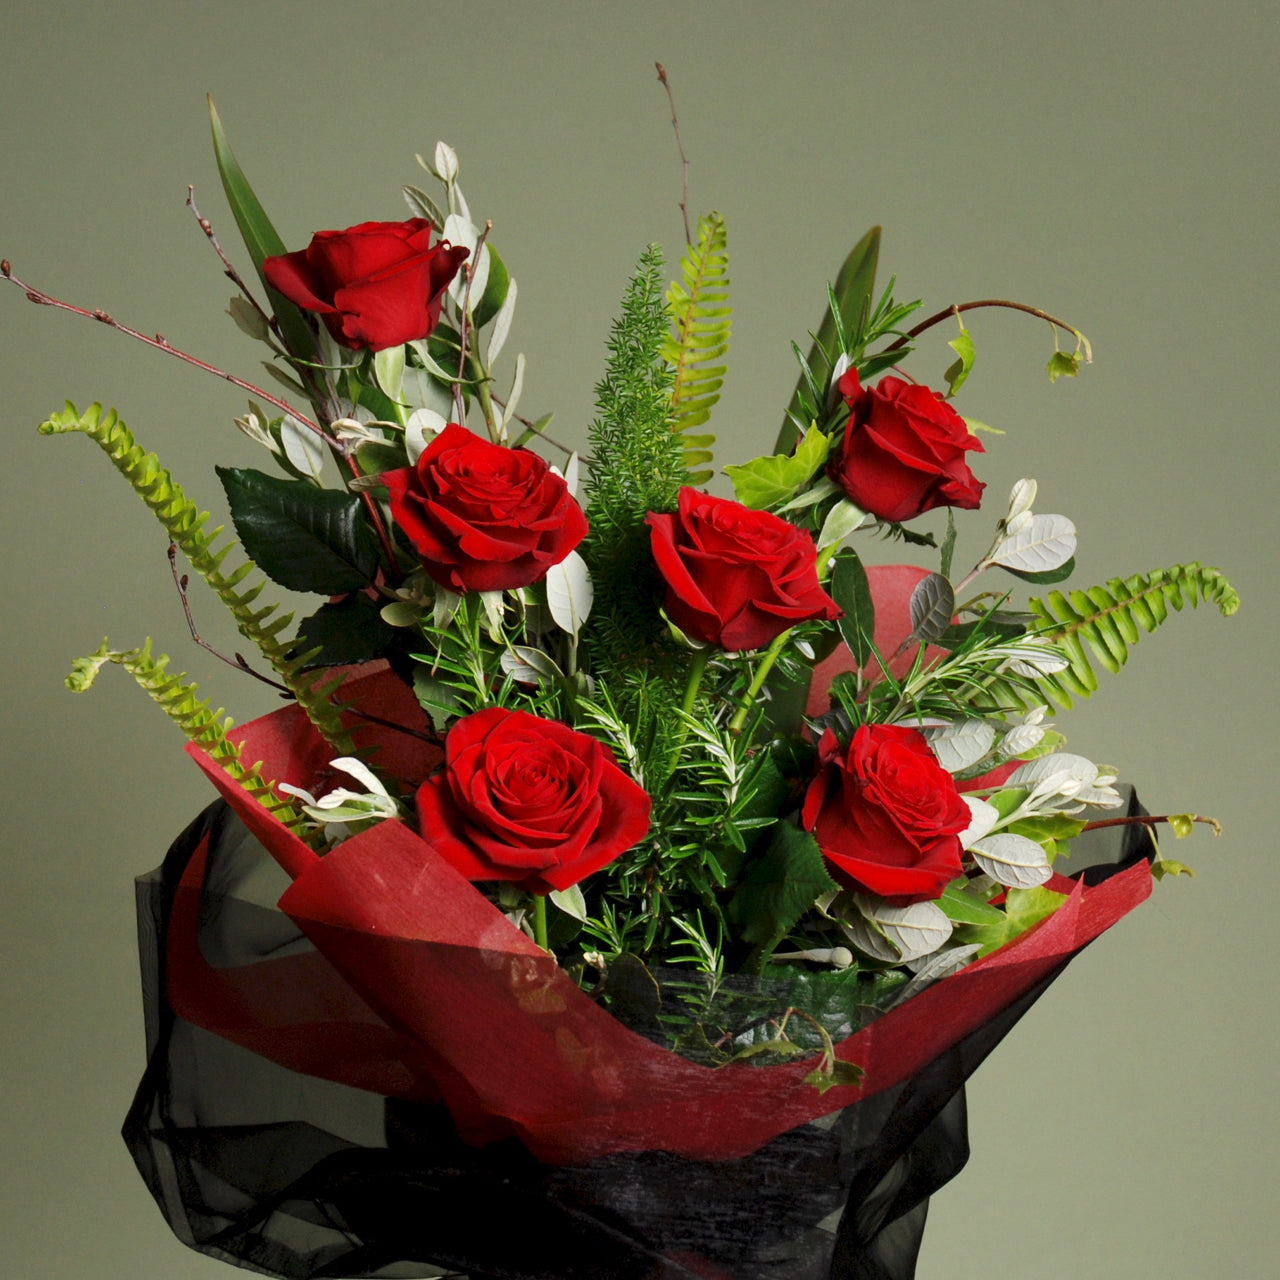 Romantic Red Roses - Valentine's Day